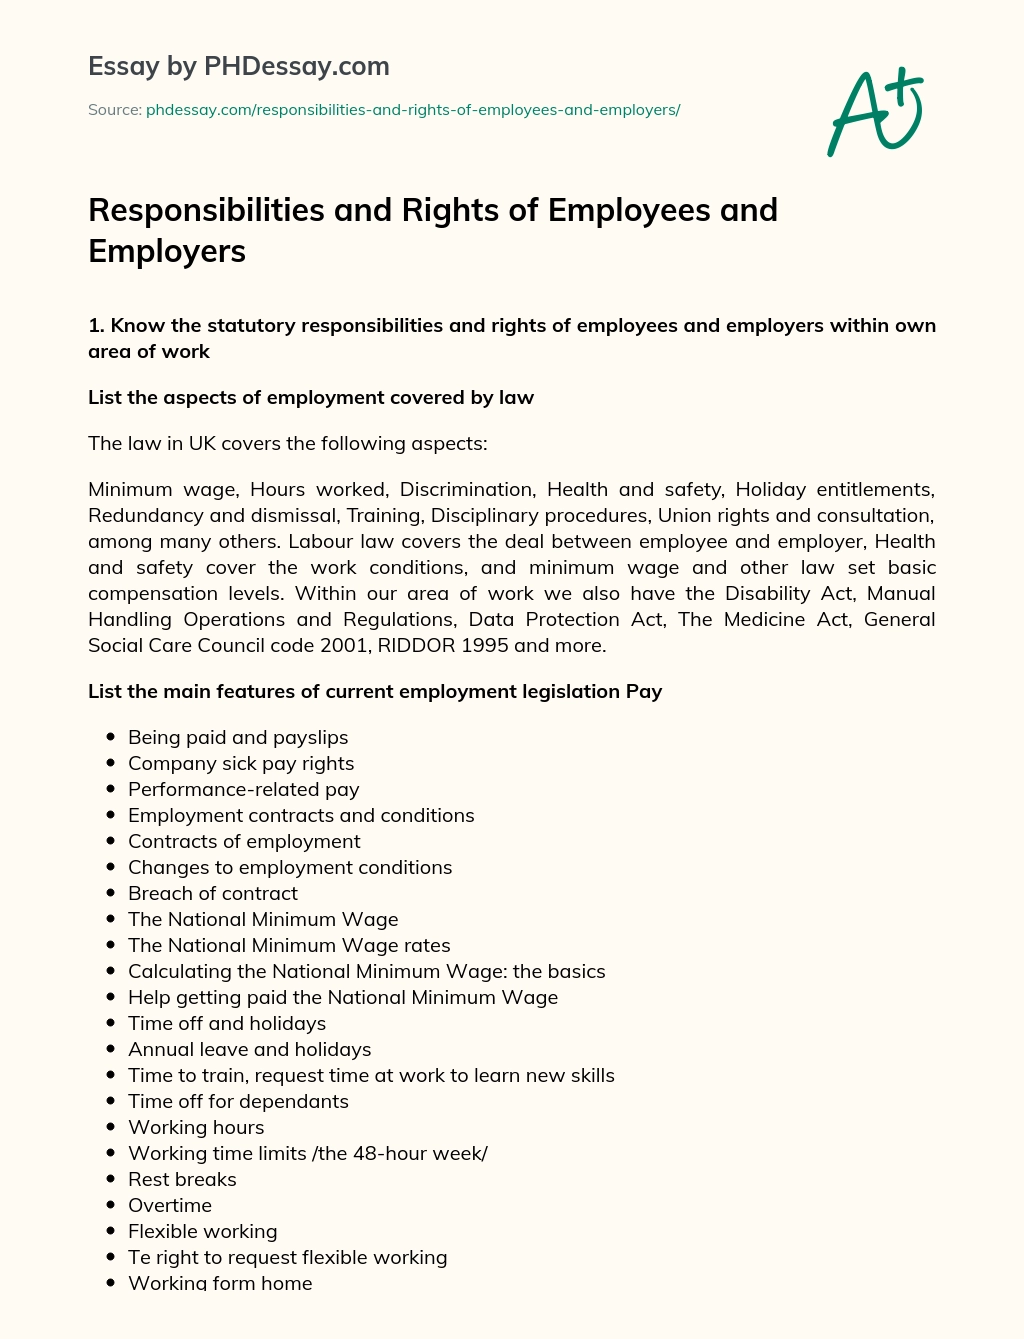 Responsibilities and Rights of Employees and Employers essay